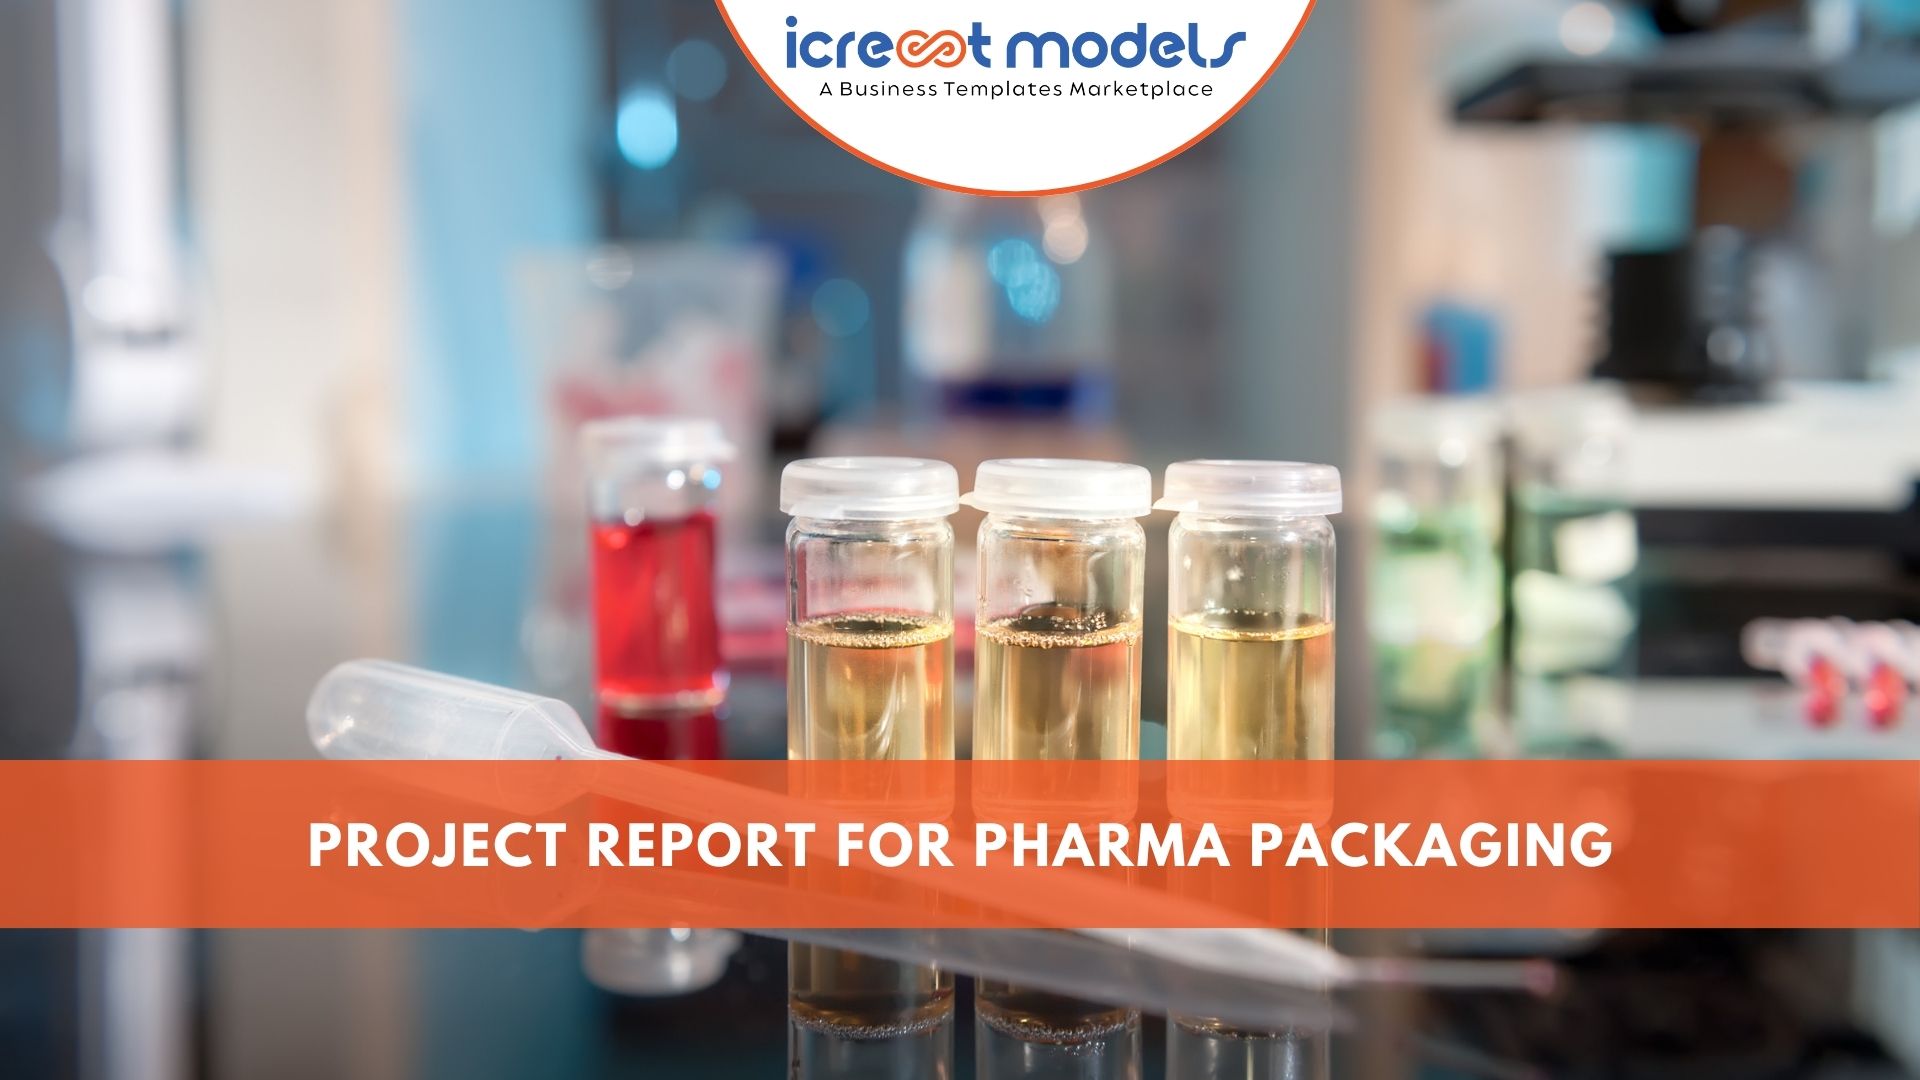 PROJECT REPORT FOR PHARMA PACKAGING